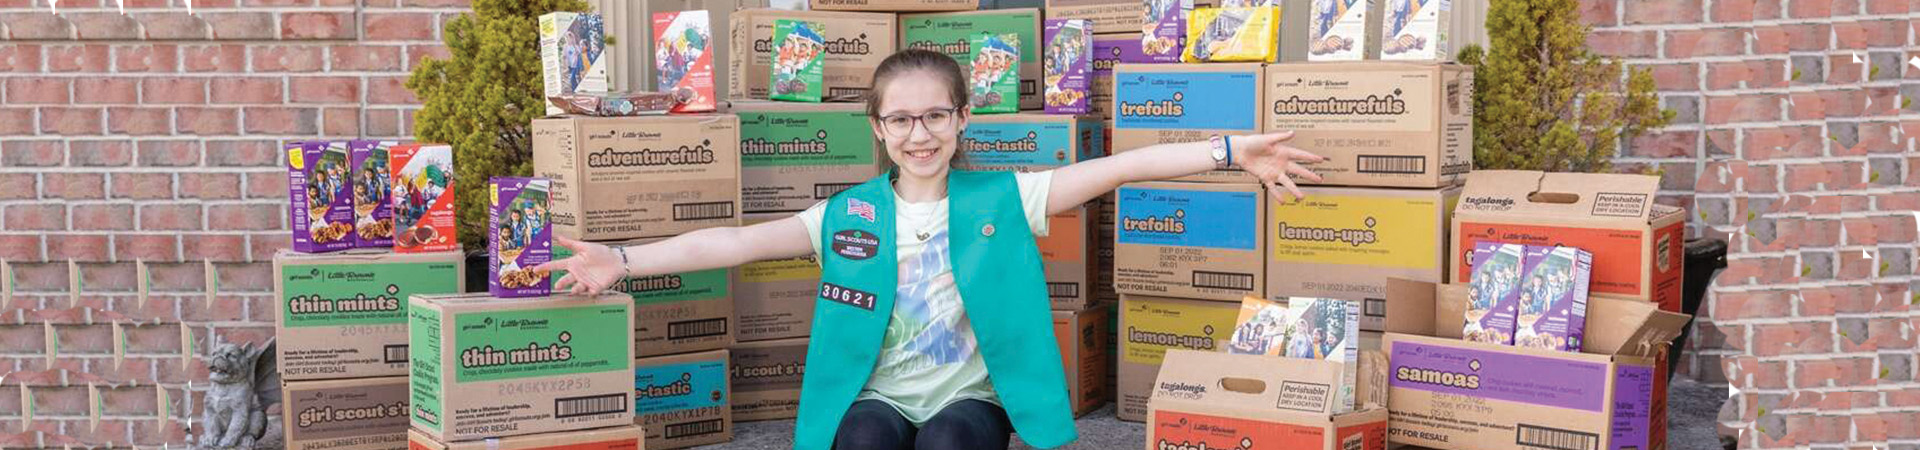  girl with her arms out in front of stacks of cookie cases 